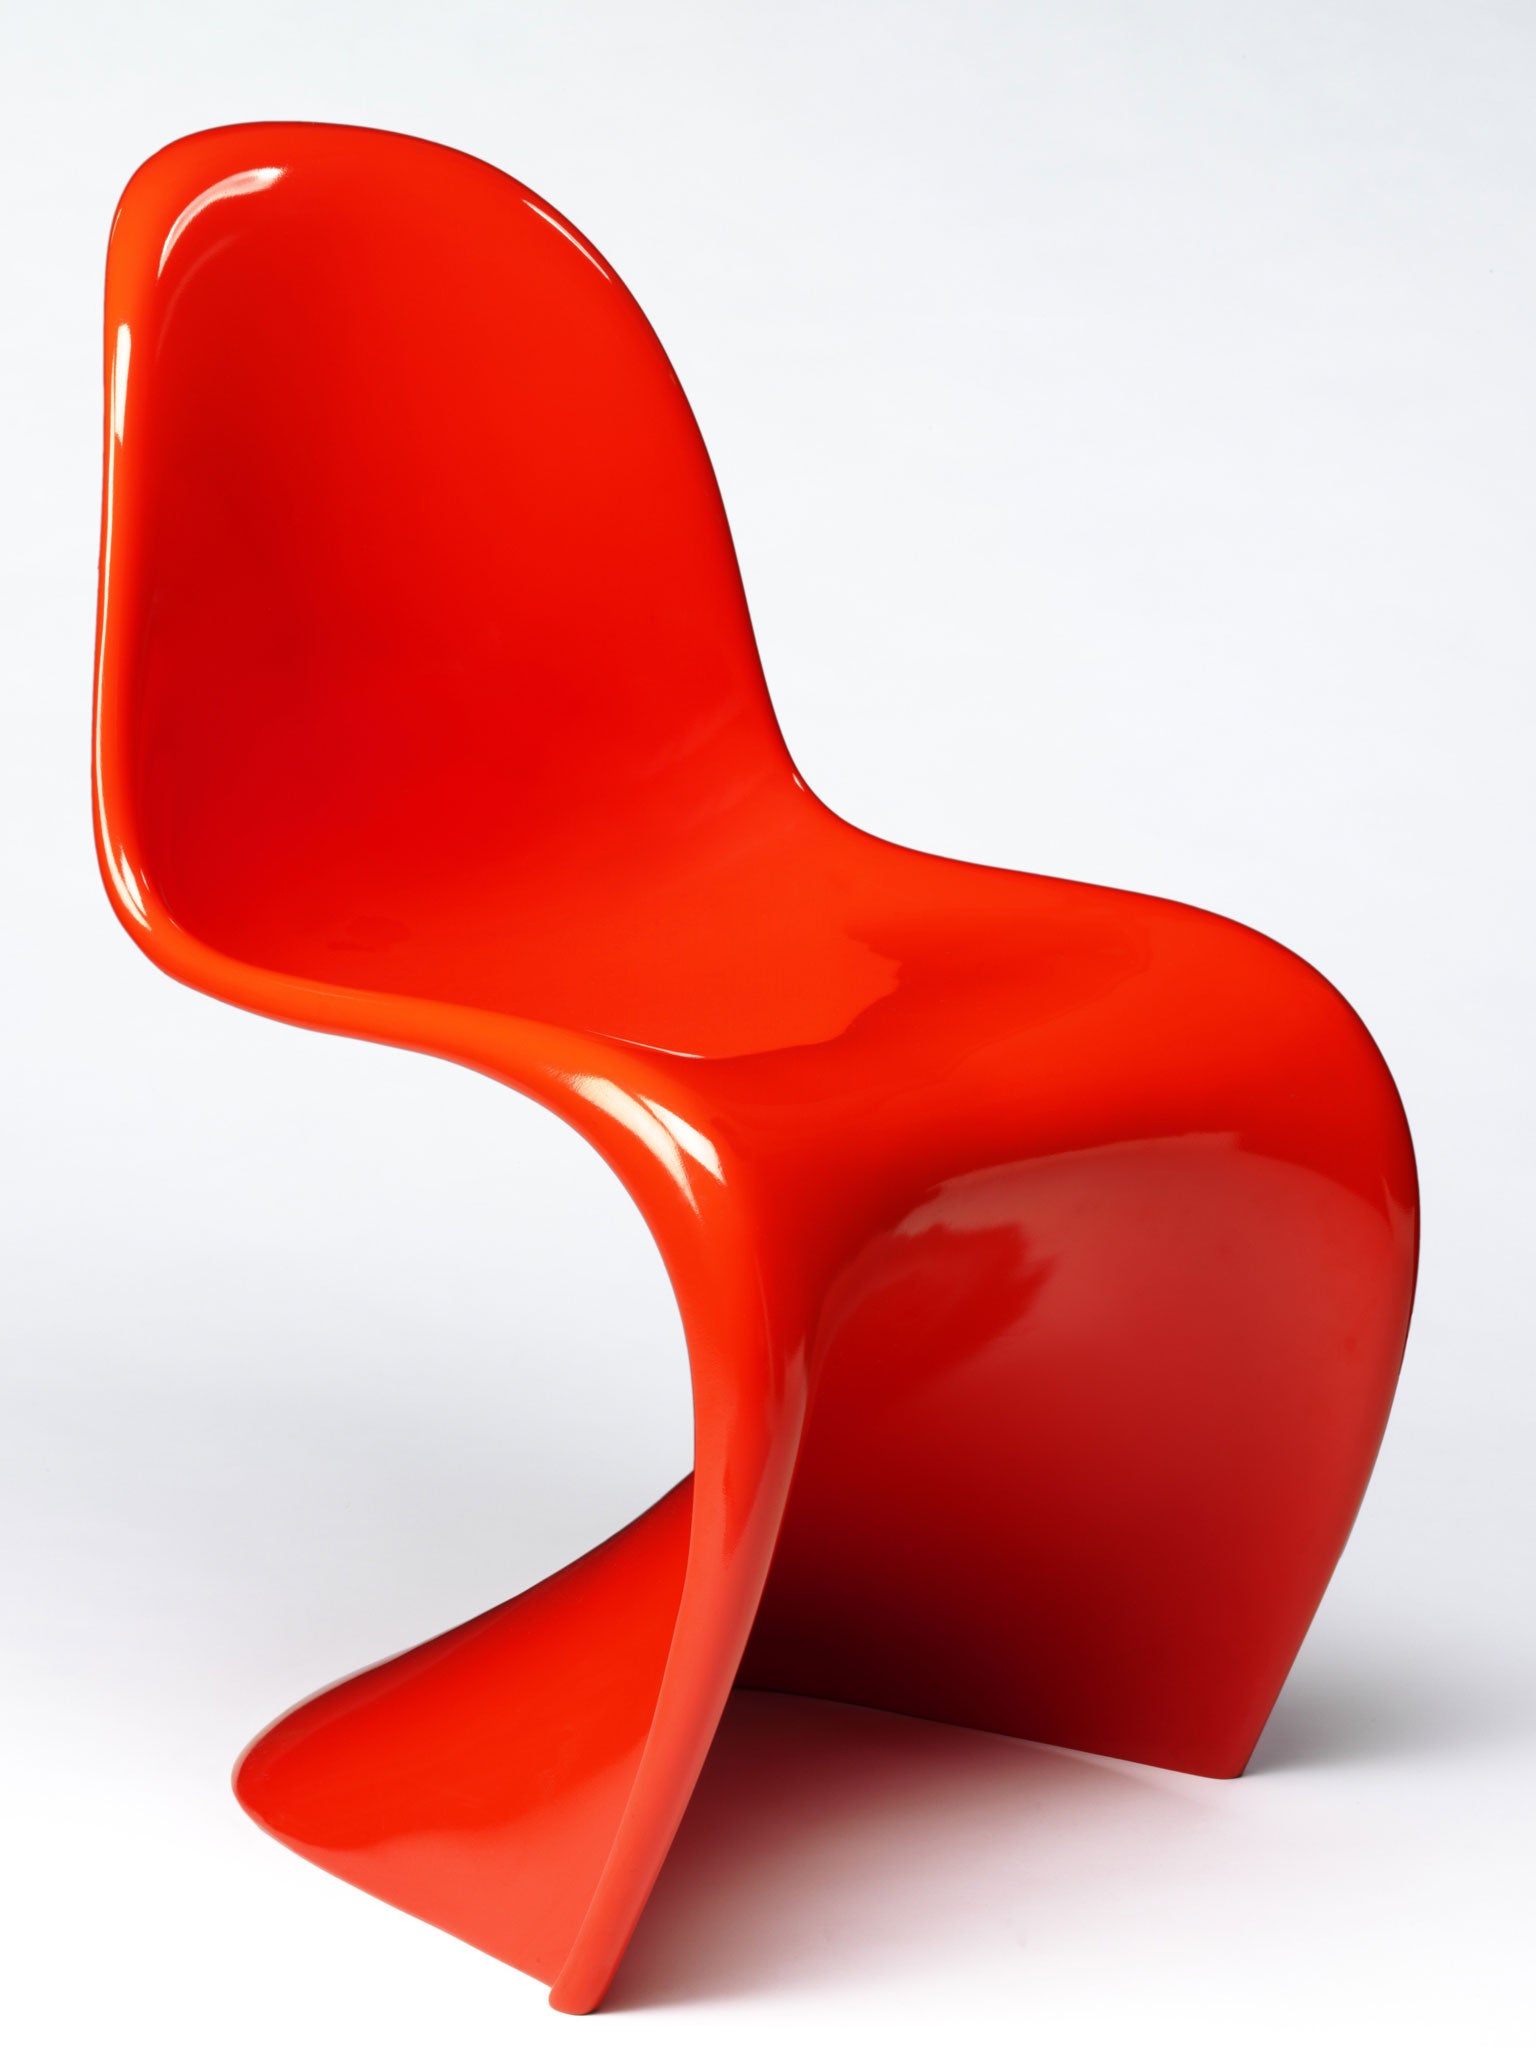 Hot seat: Verner Panton’s 1968 plastic chair is one of 200 works chosen from a collection of 14,000